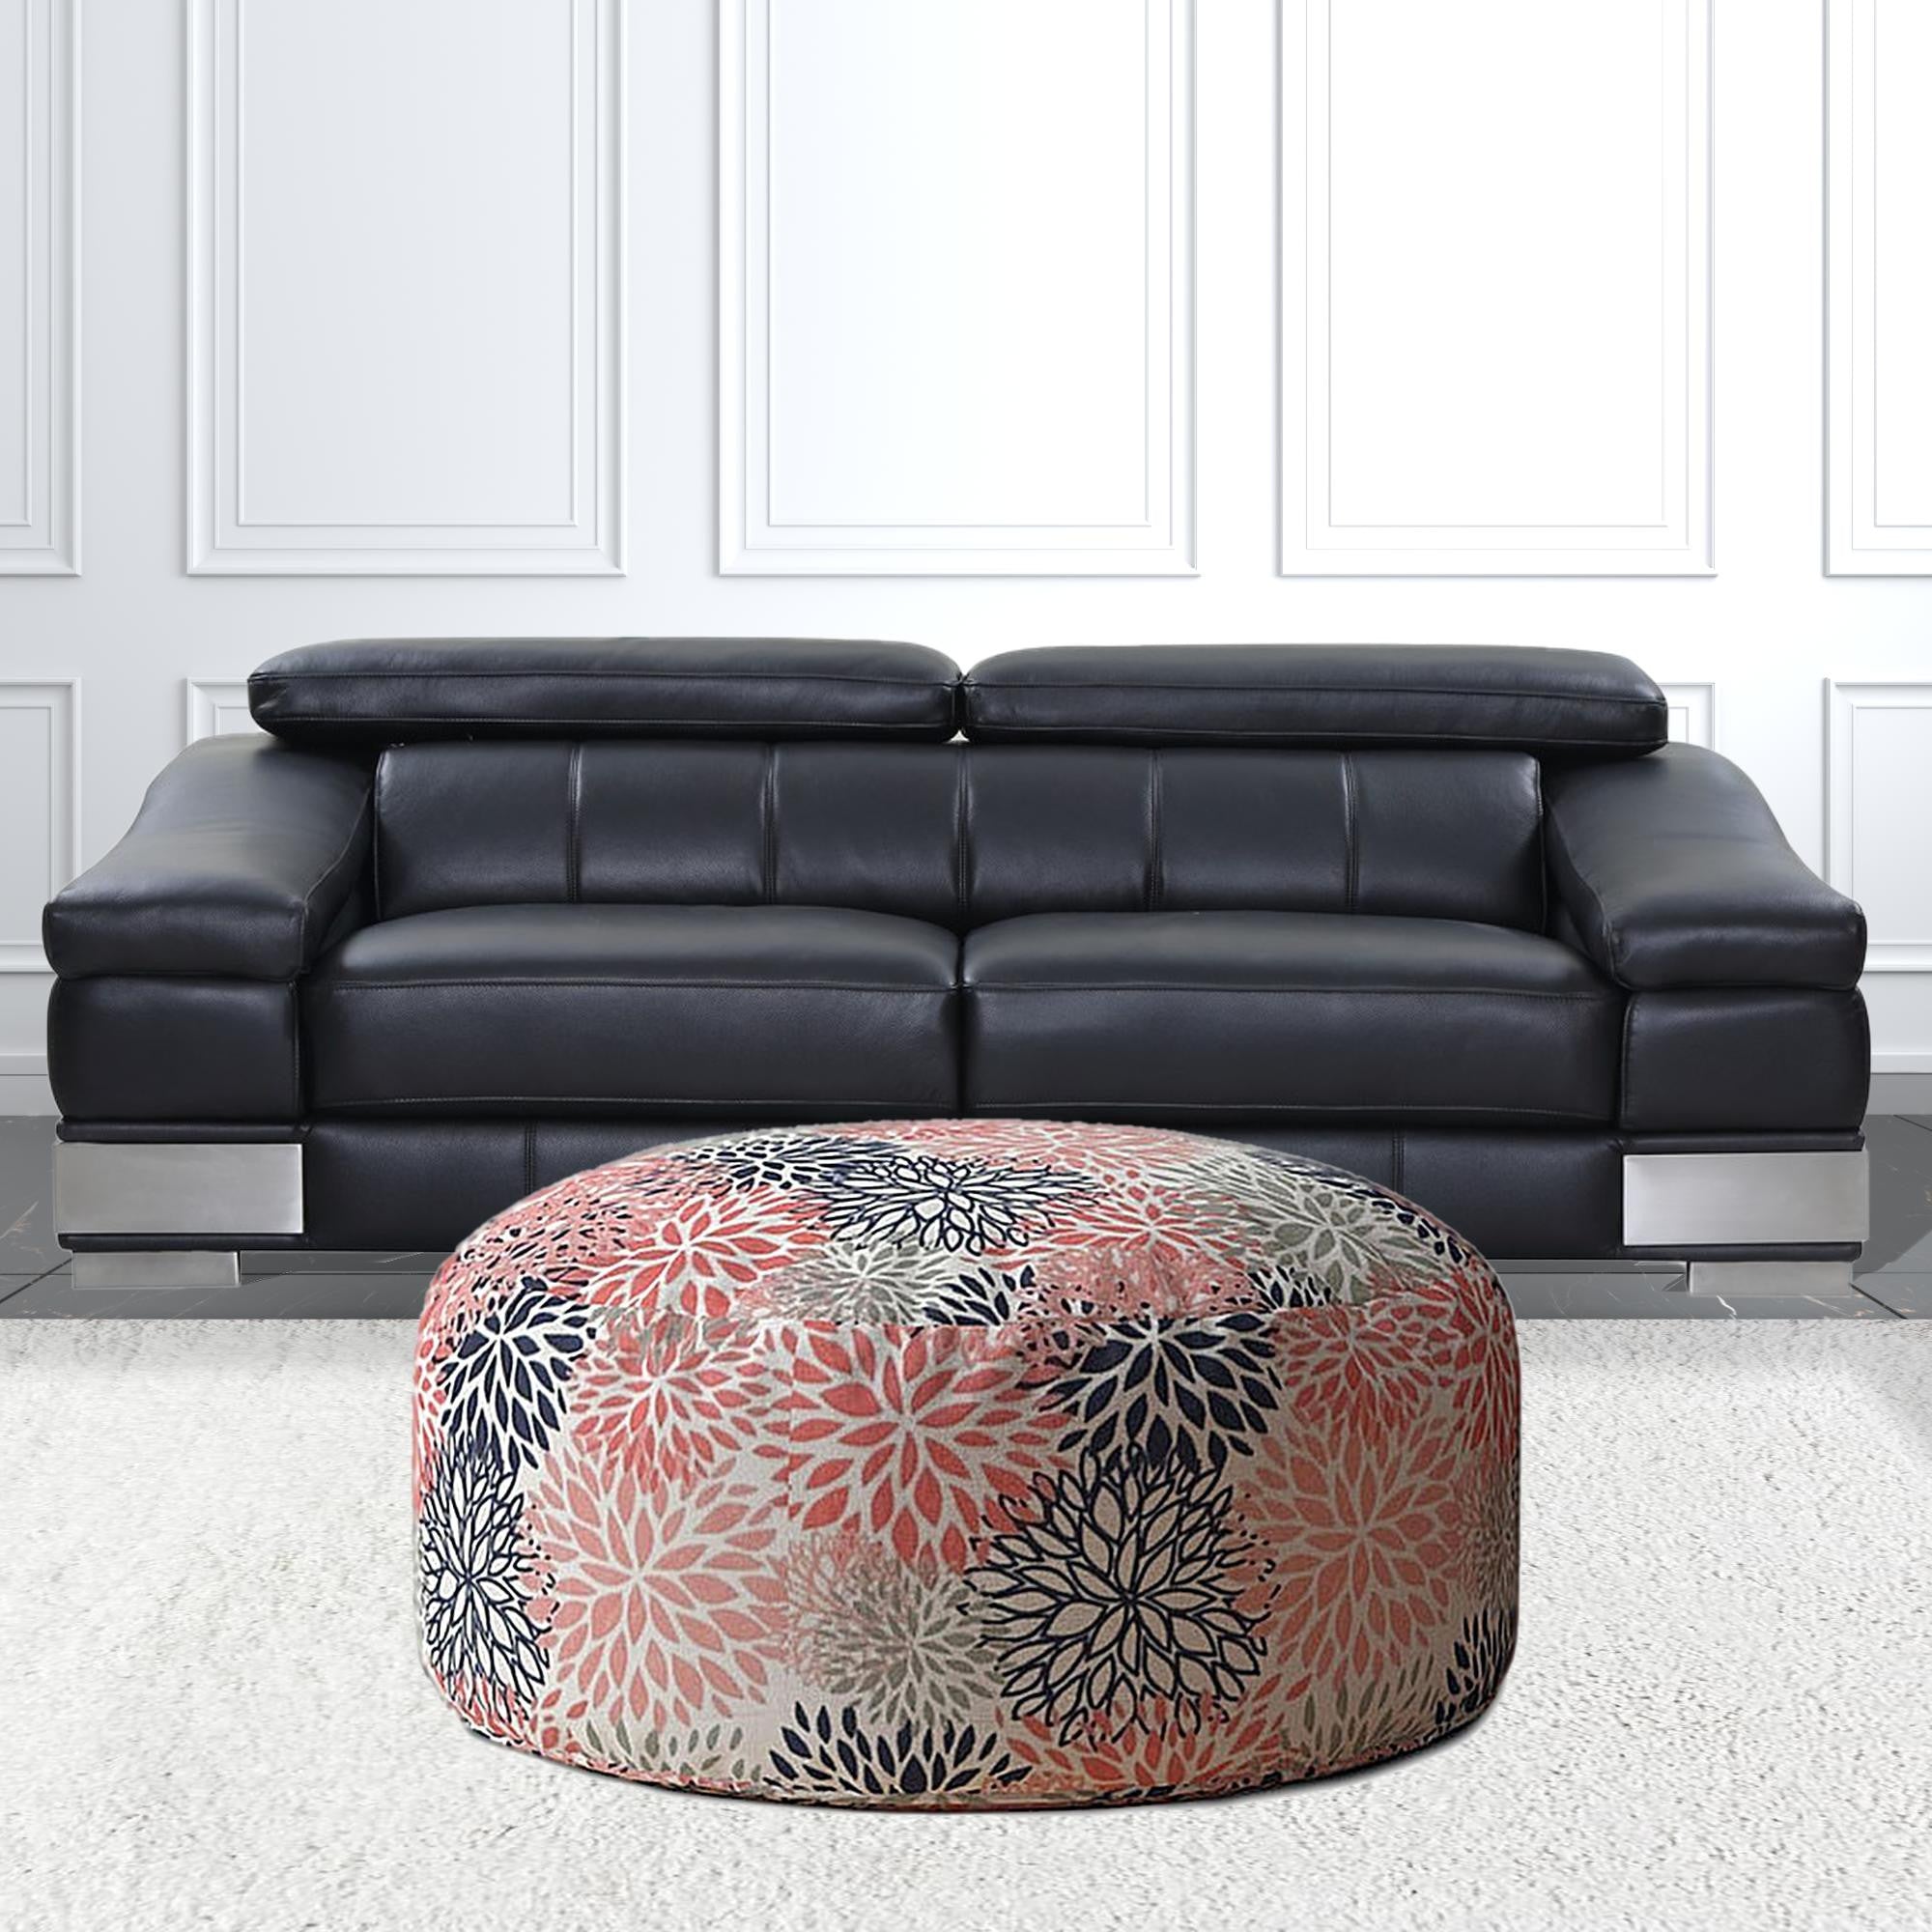 24" Coral Polyester Round Floral Pouf Ottoman